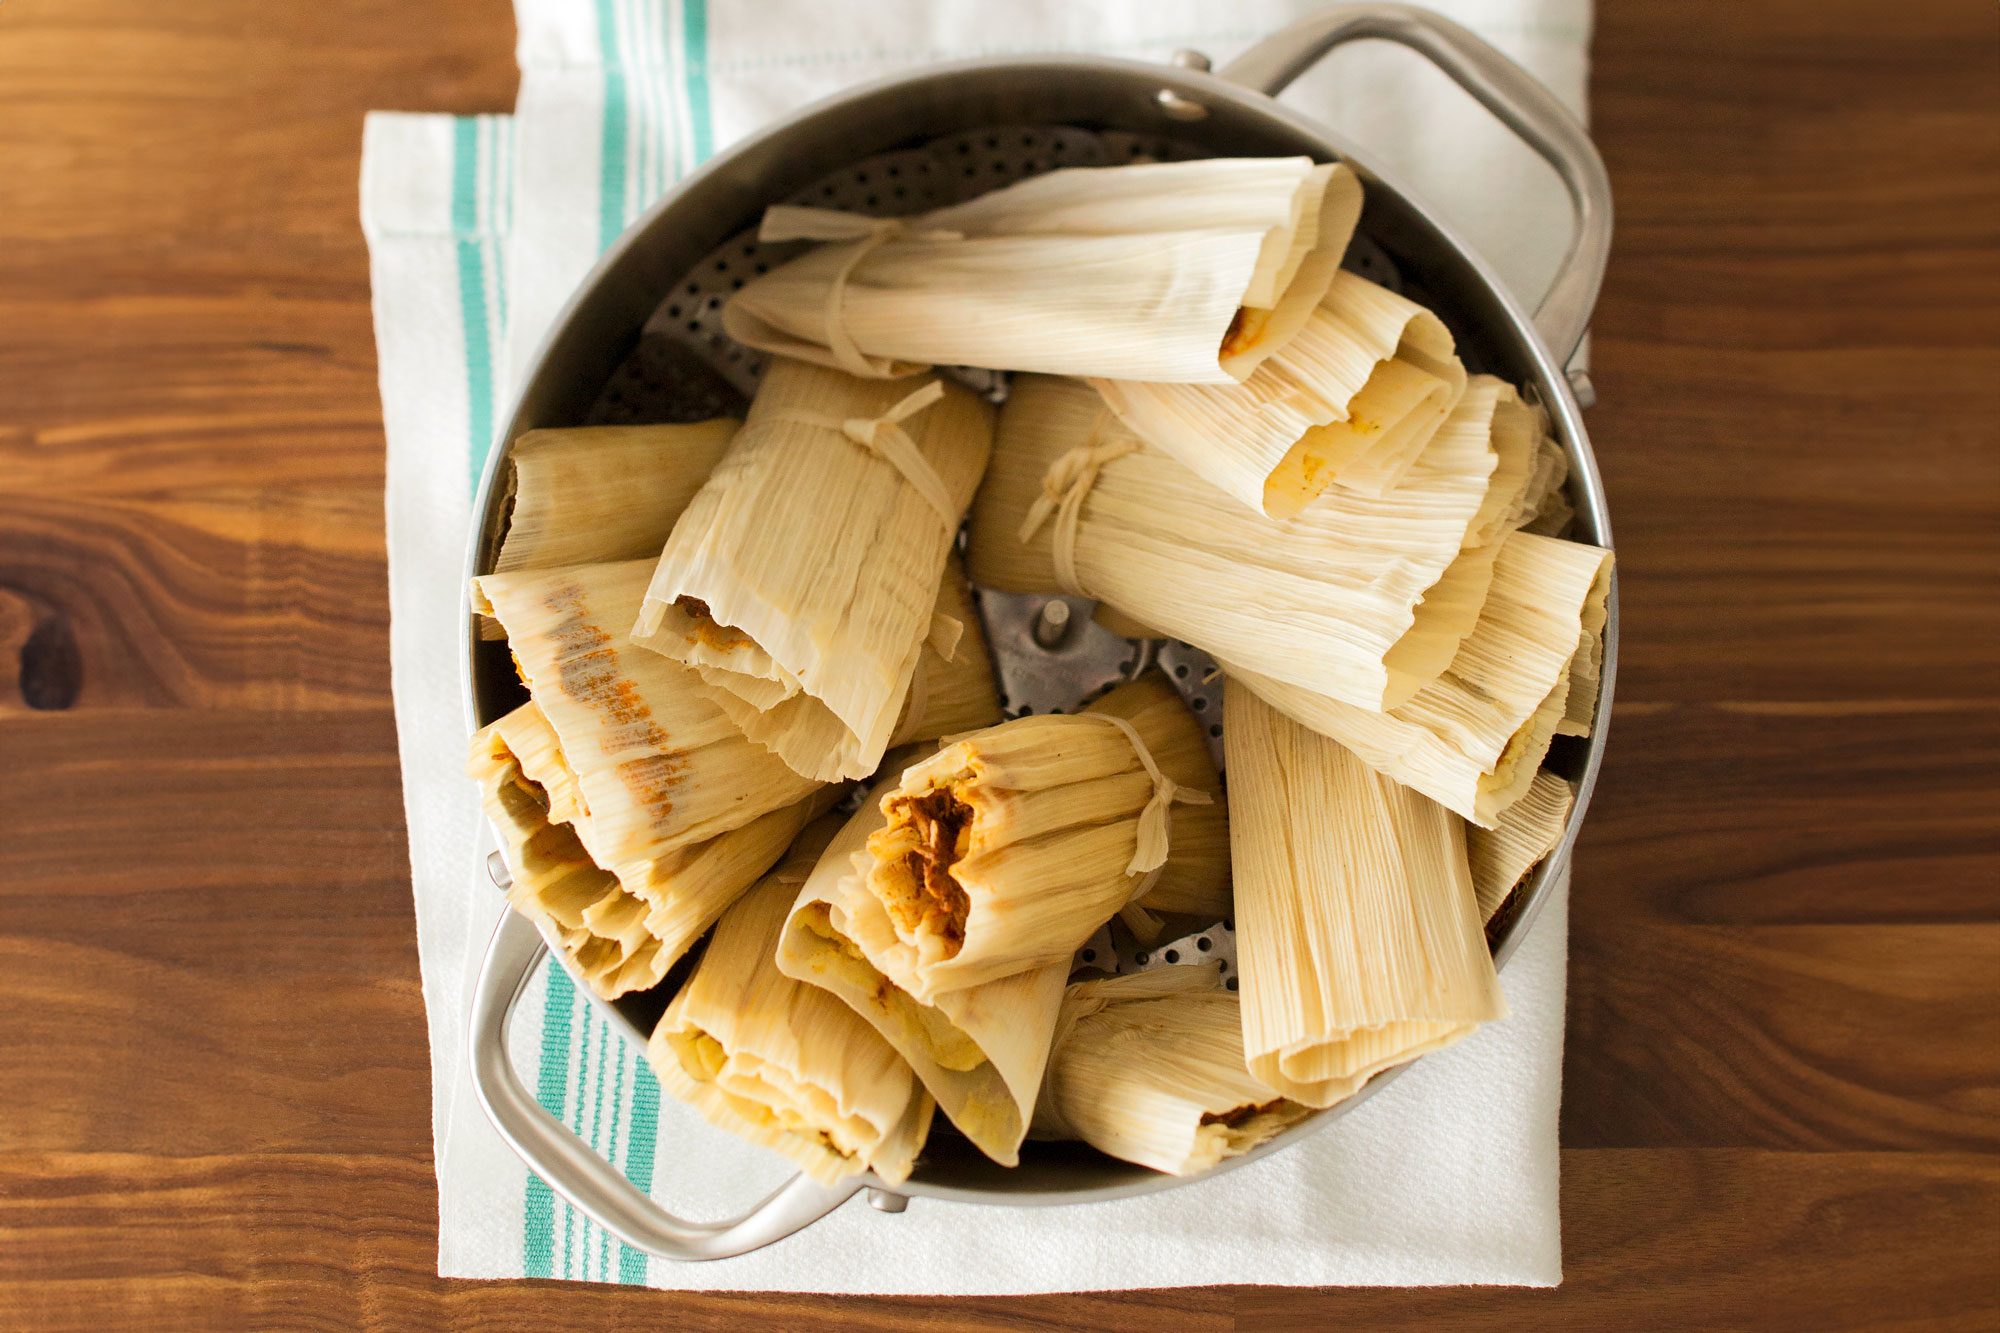 Cook the tamales in a steamer